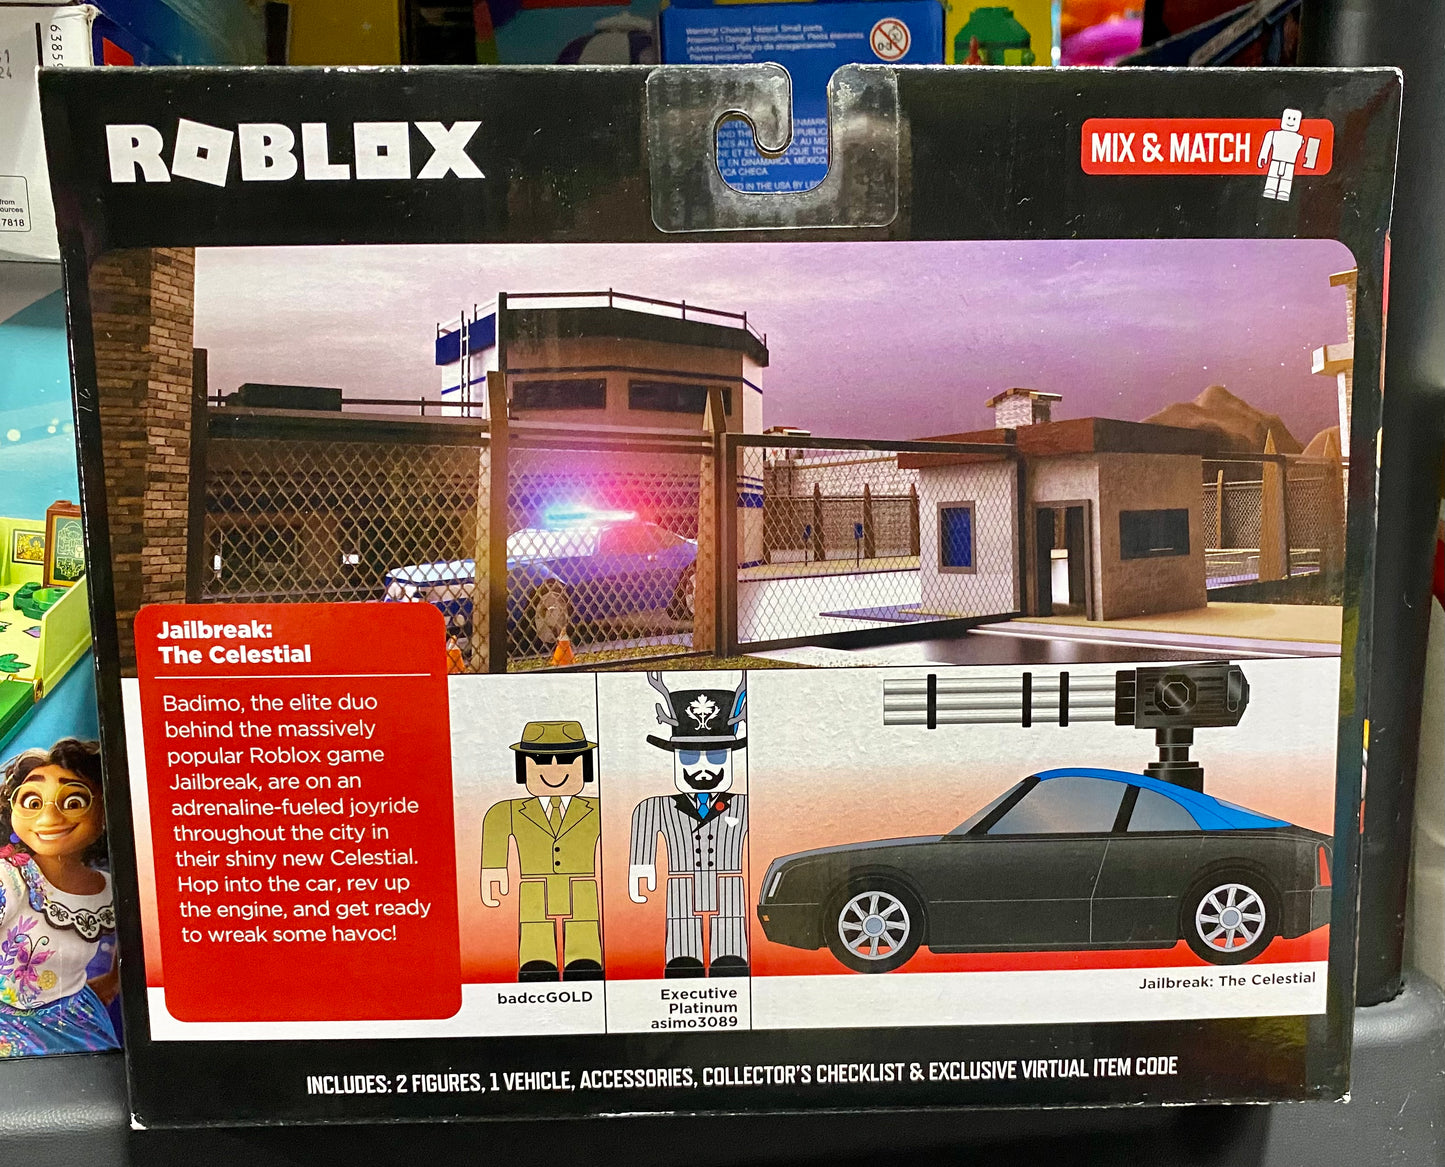 Roblox Jailbreak: The Celestial Deluxe Vehicle Exclusive Virtual Item Included